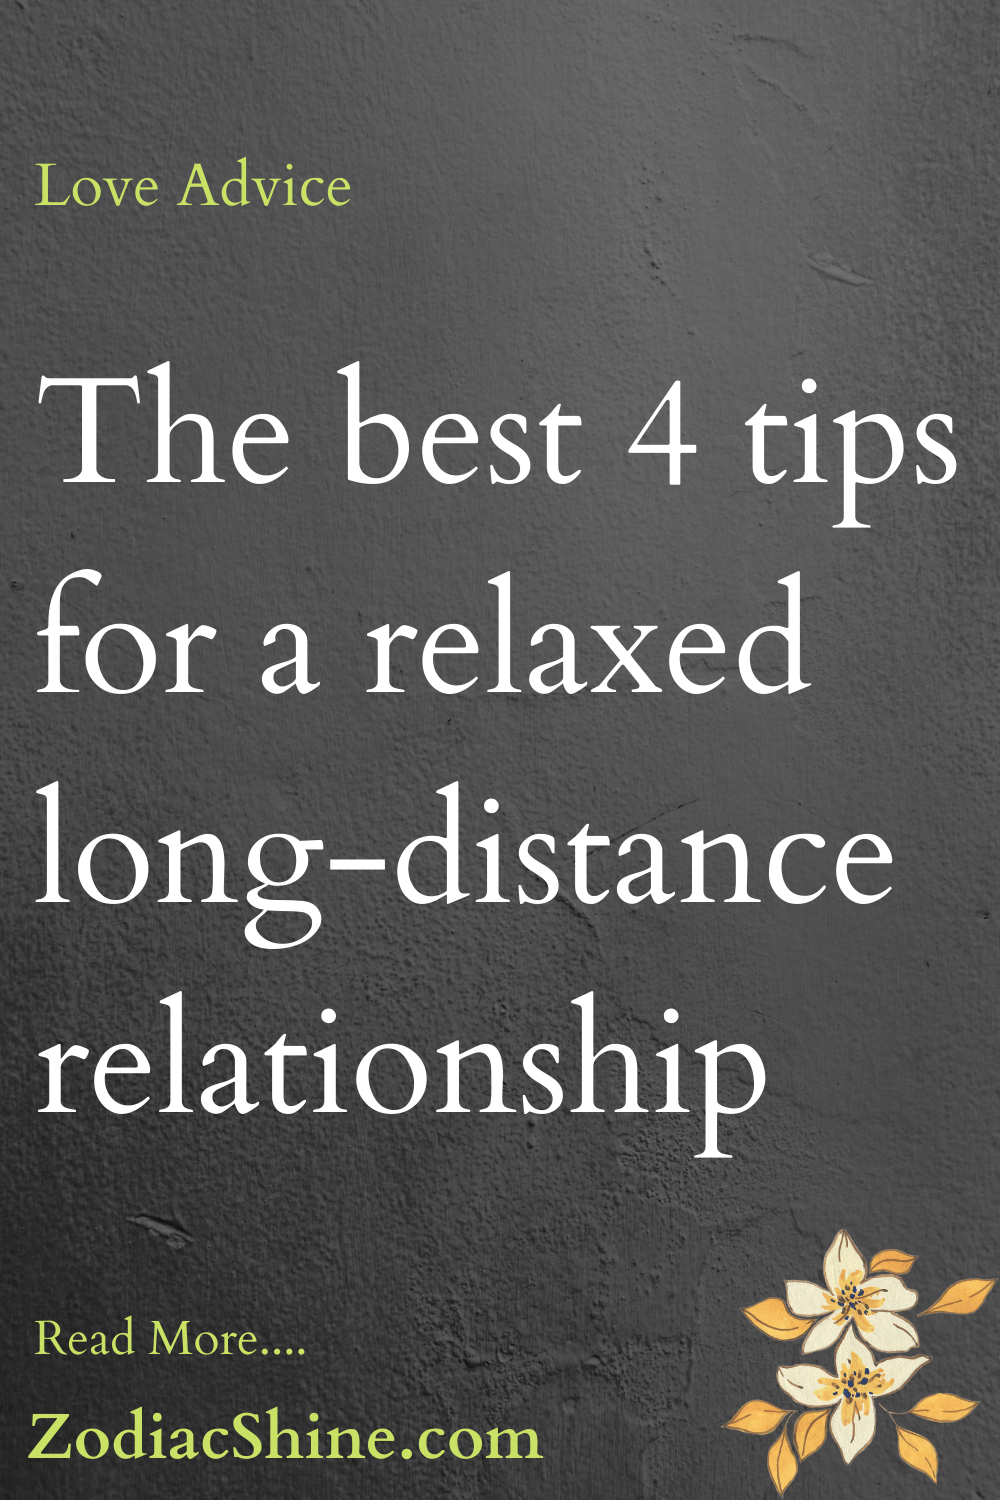 The best 4 tips for a relaxed long-distance relationship